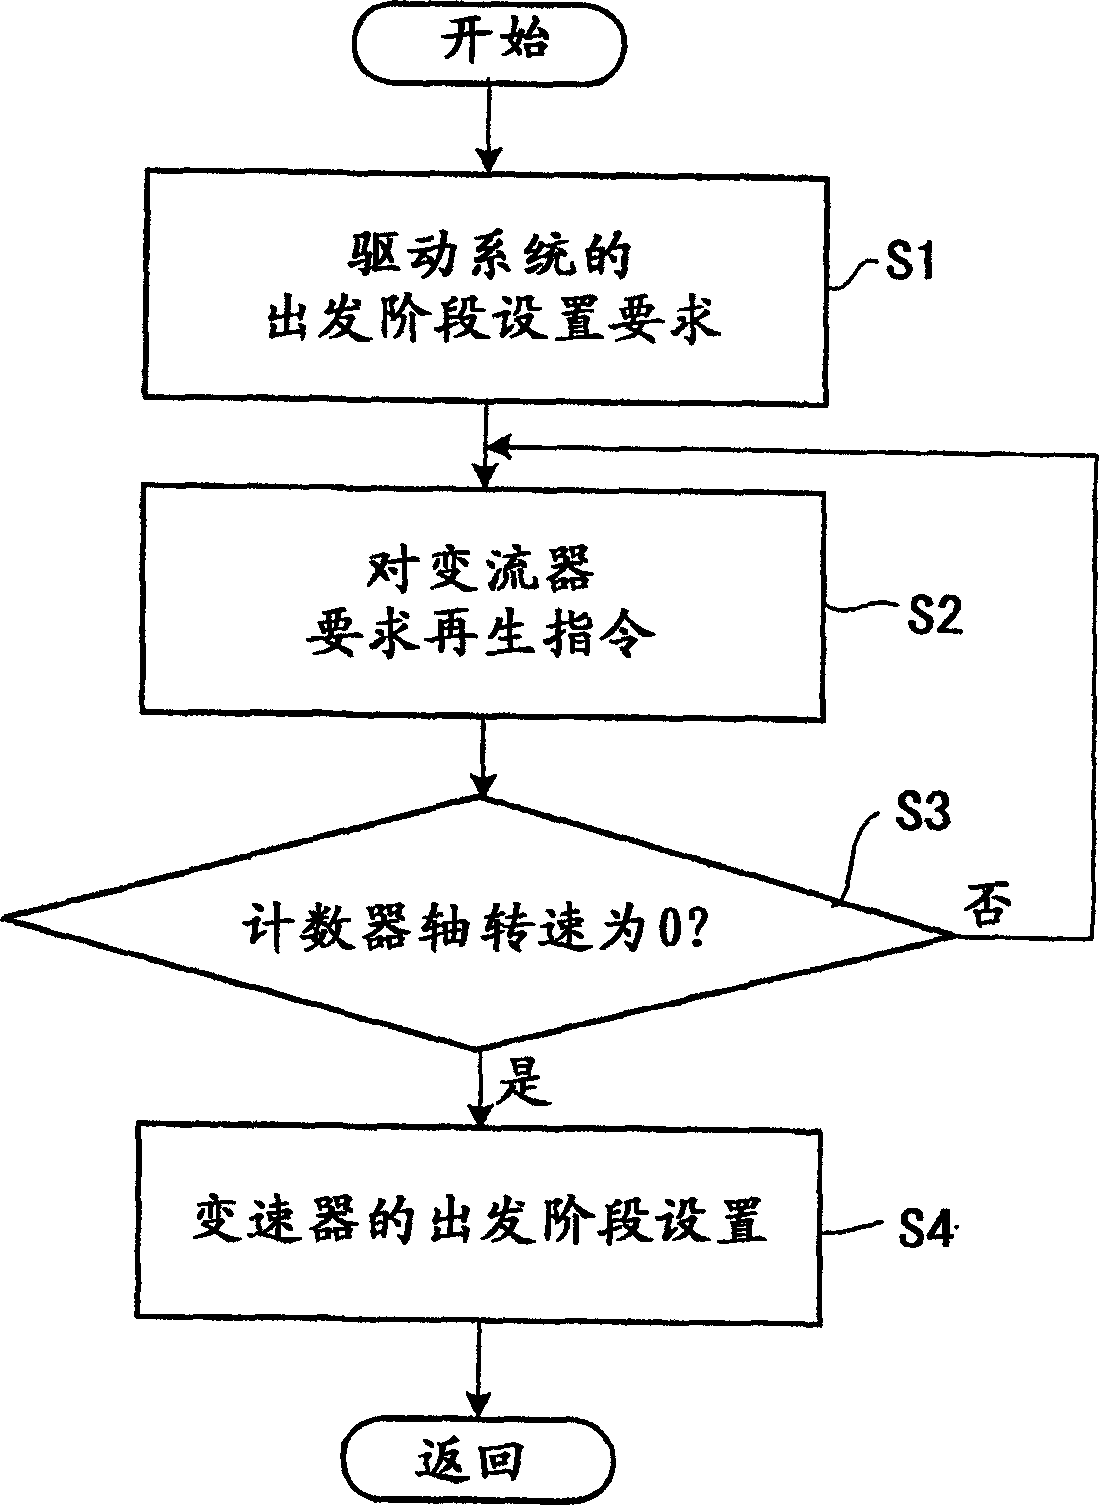 Gear shift control device of hybrid power vehicle